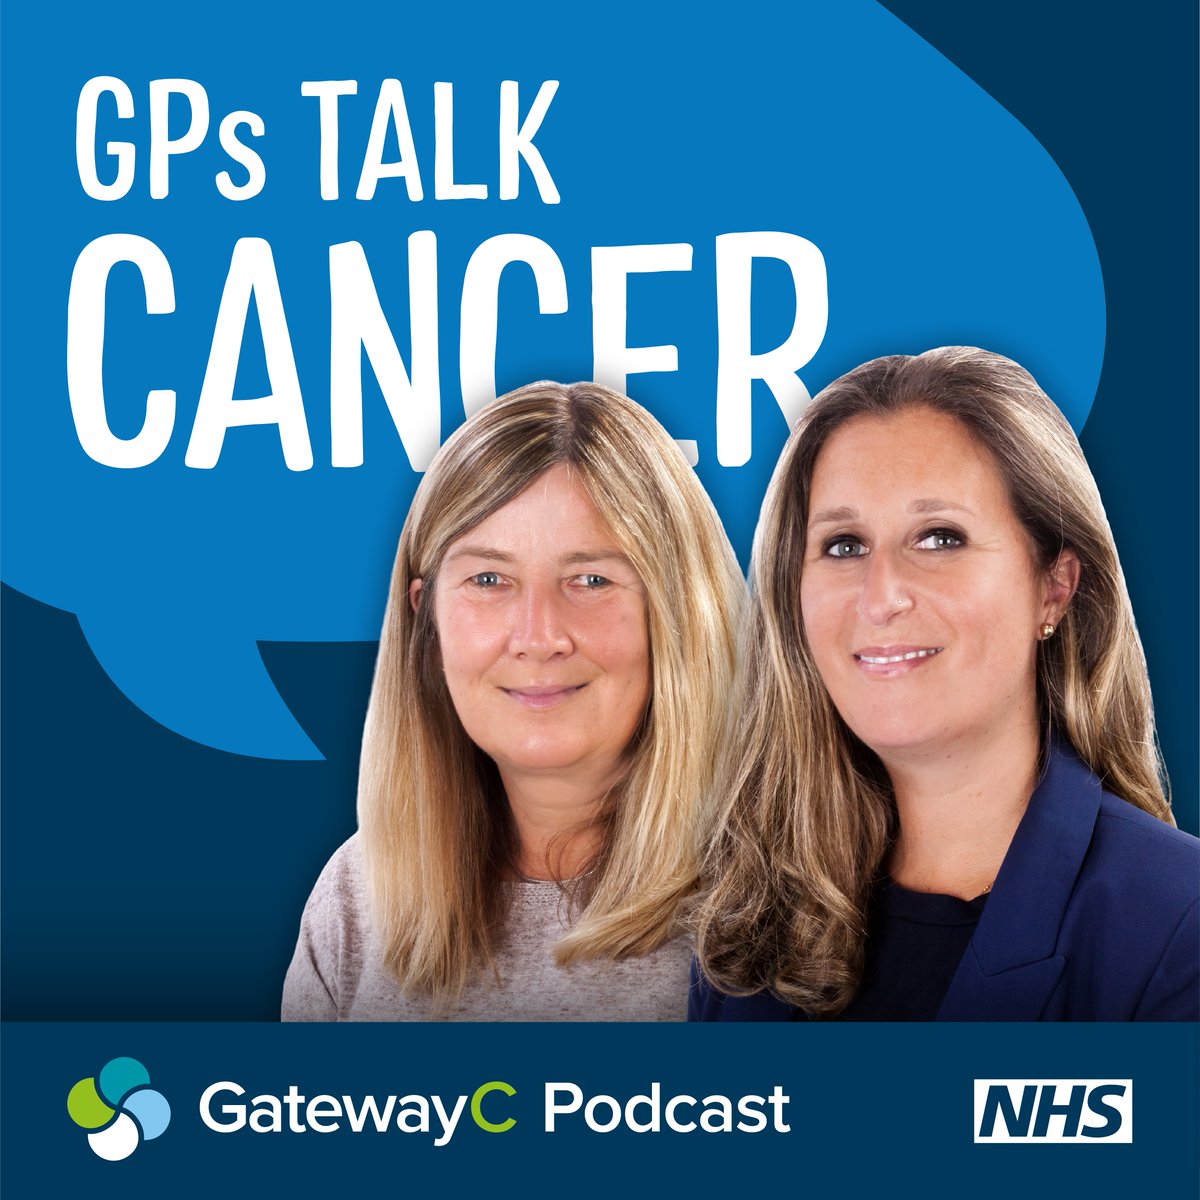 Could your patient’s IBS really be ovarian cancer? In our #GPsTalkCancer podcast episode, @drrebeccaleon and @taylorstoronto cover the abdominal symptoms of ovarian cancer, IBS coding & more. Listen now 👉 bit.ly/3UUAyz7 #OvarianCancerAwarenessMonth